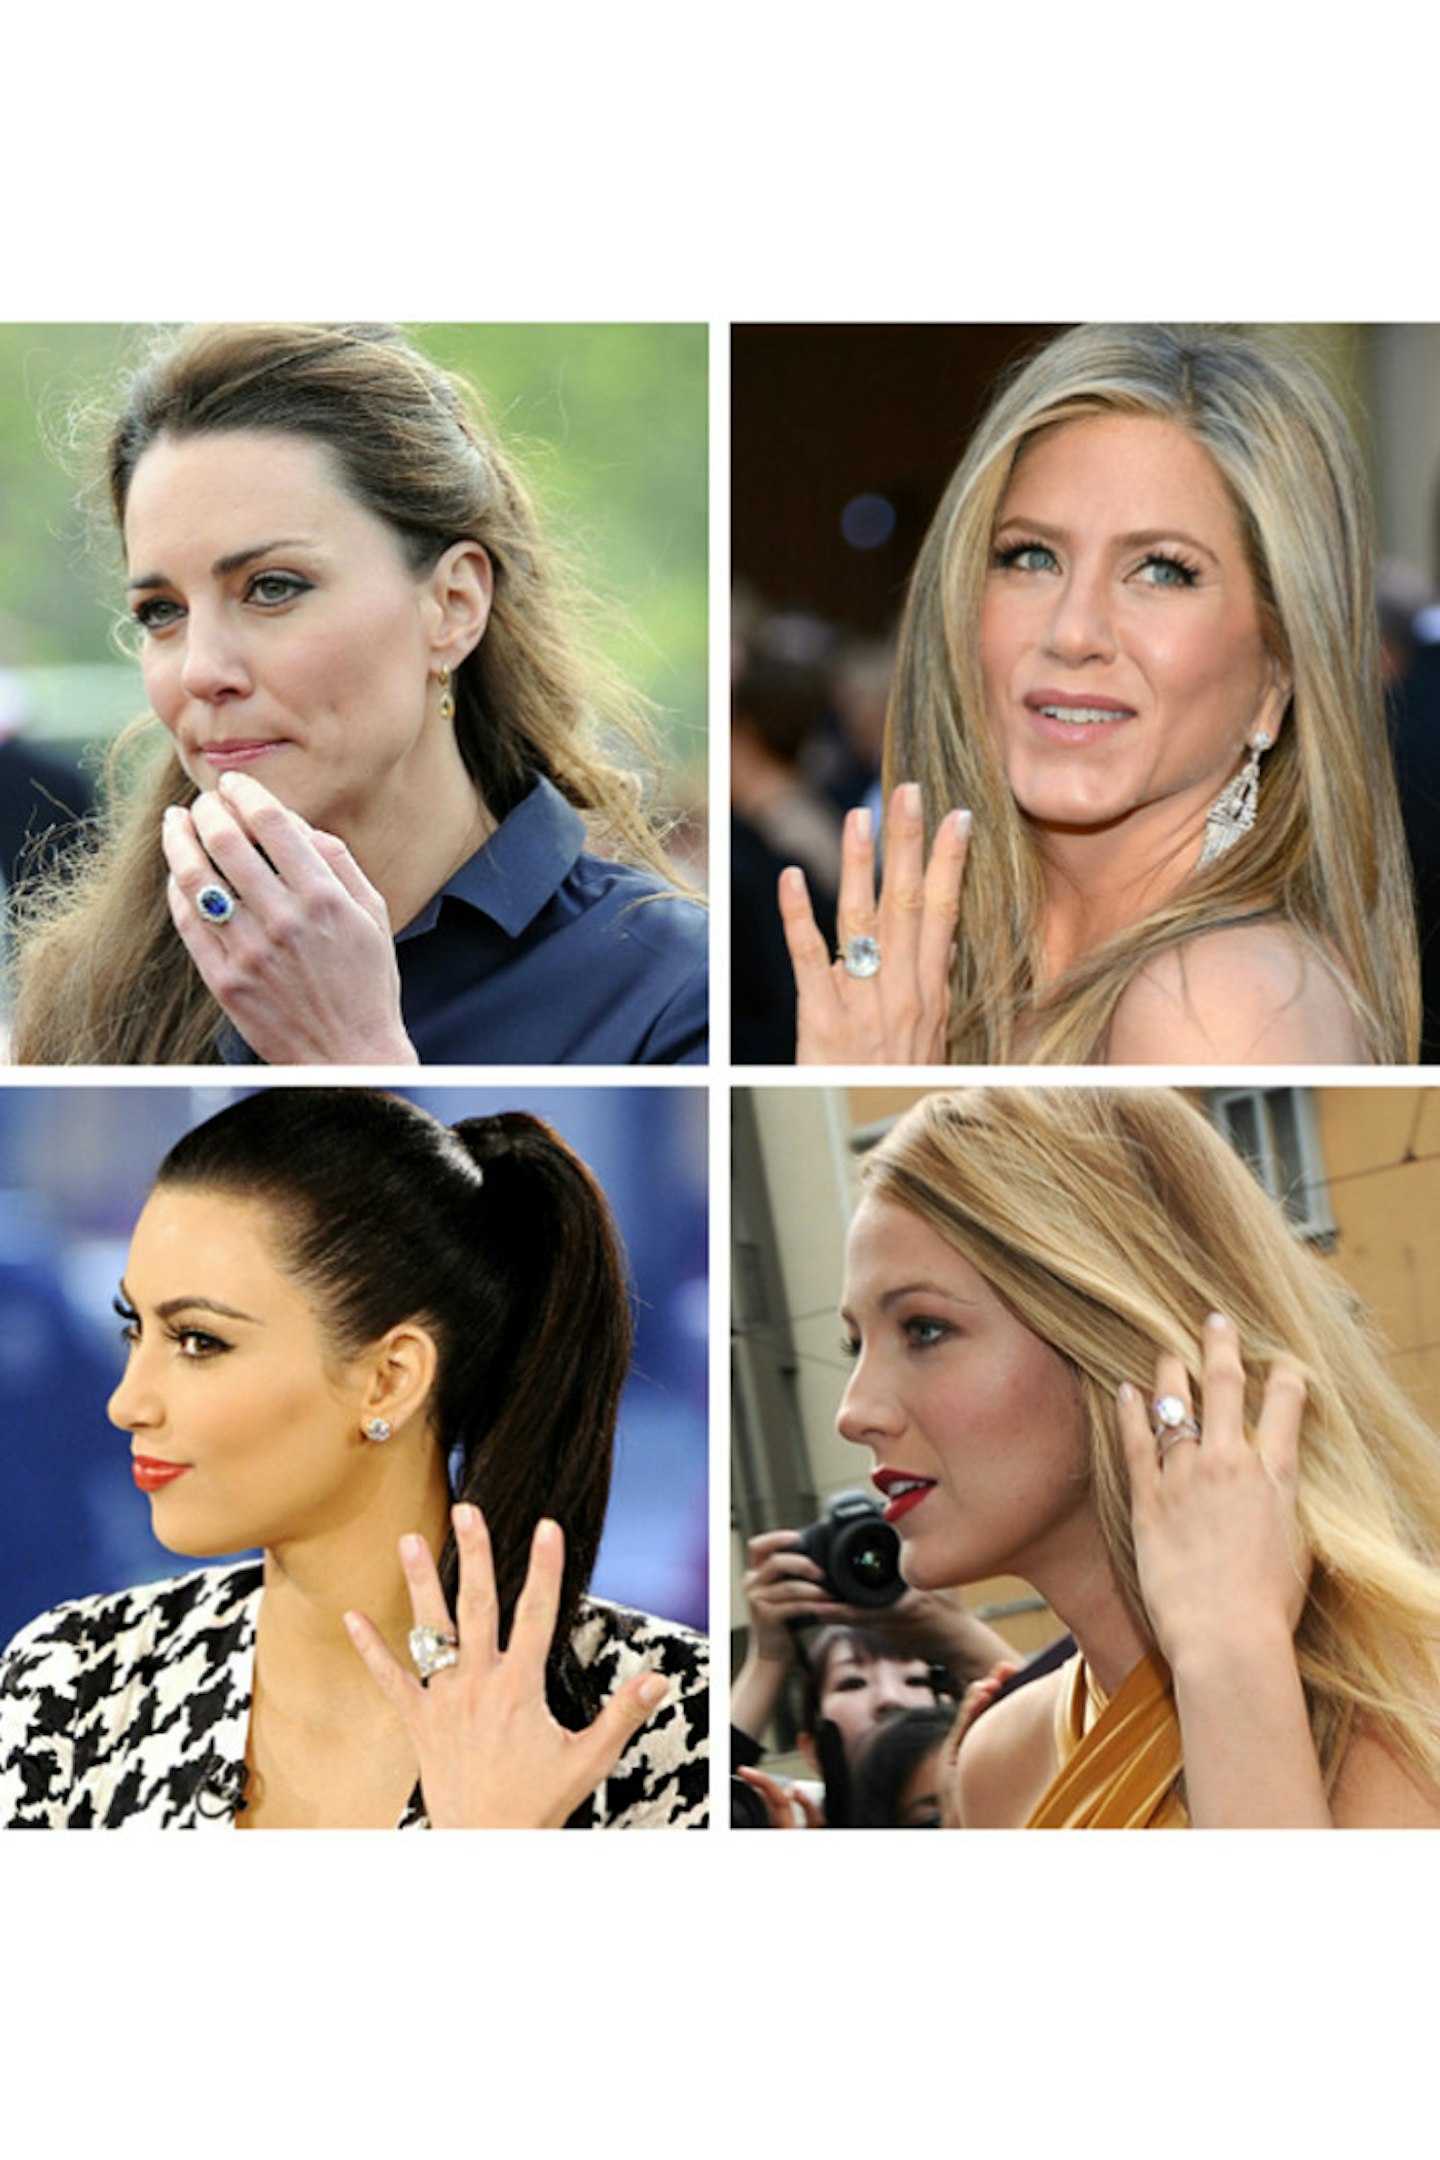 GALLERY >> The best celebrity engagement rings